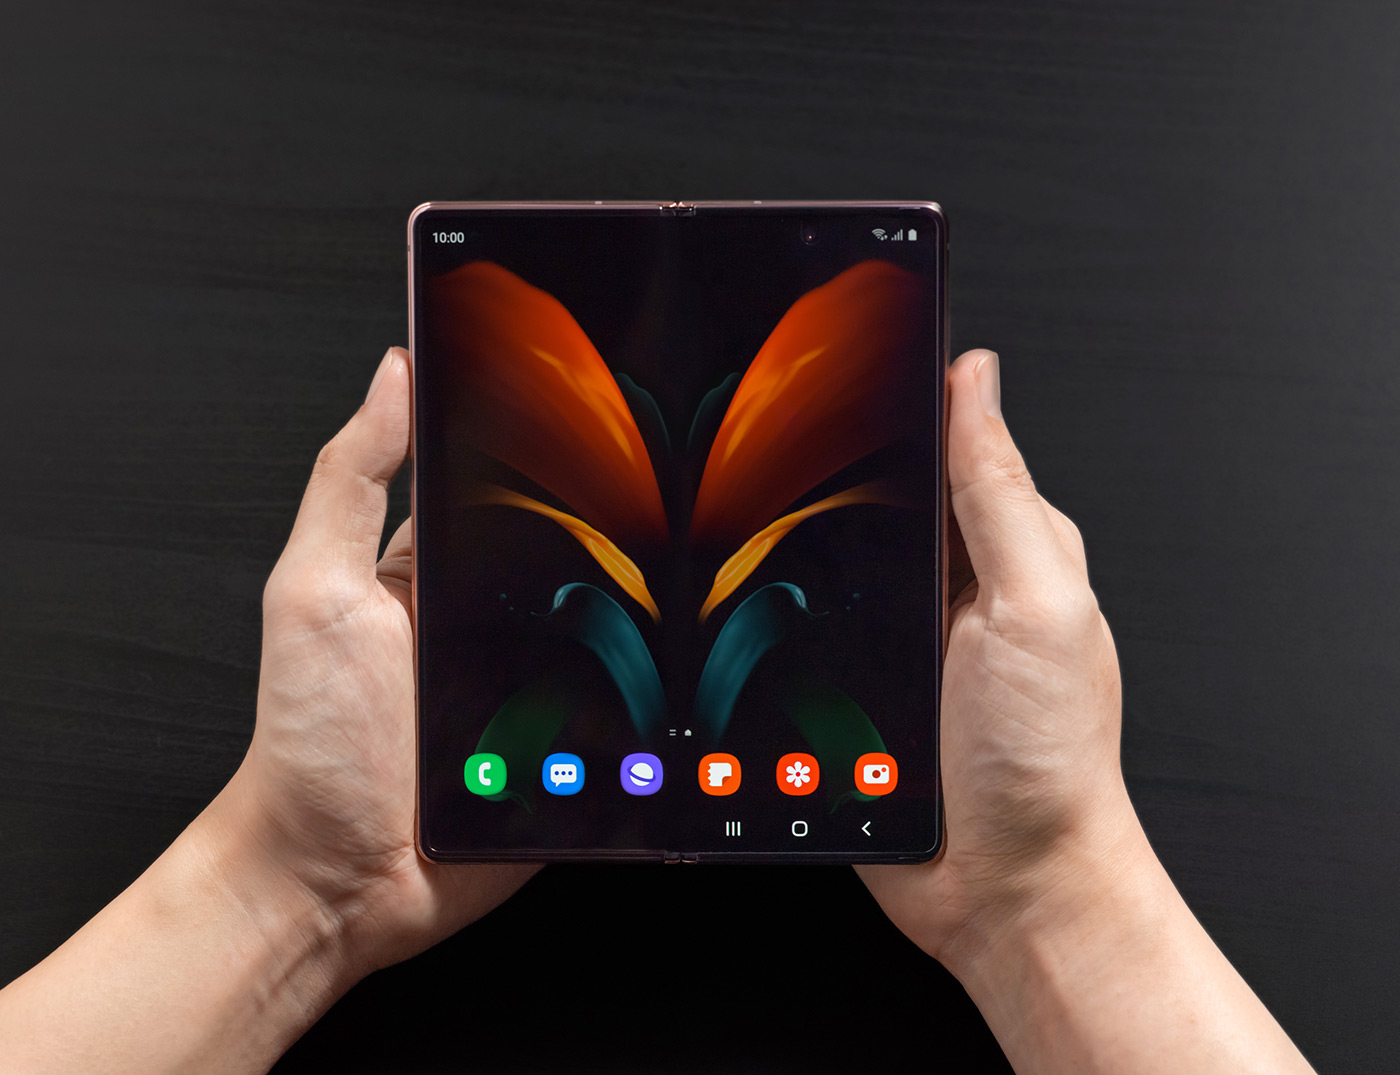 Galaxy Z Fold2 first look, unique features in detail